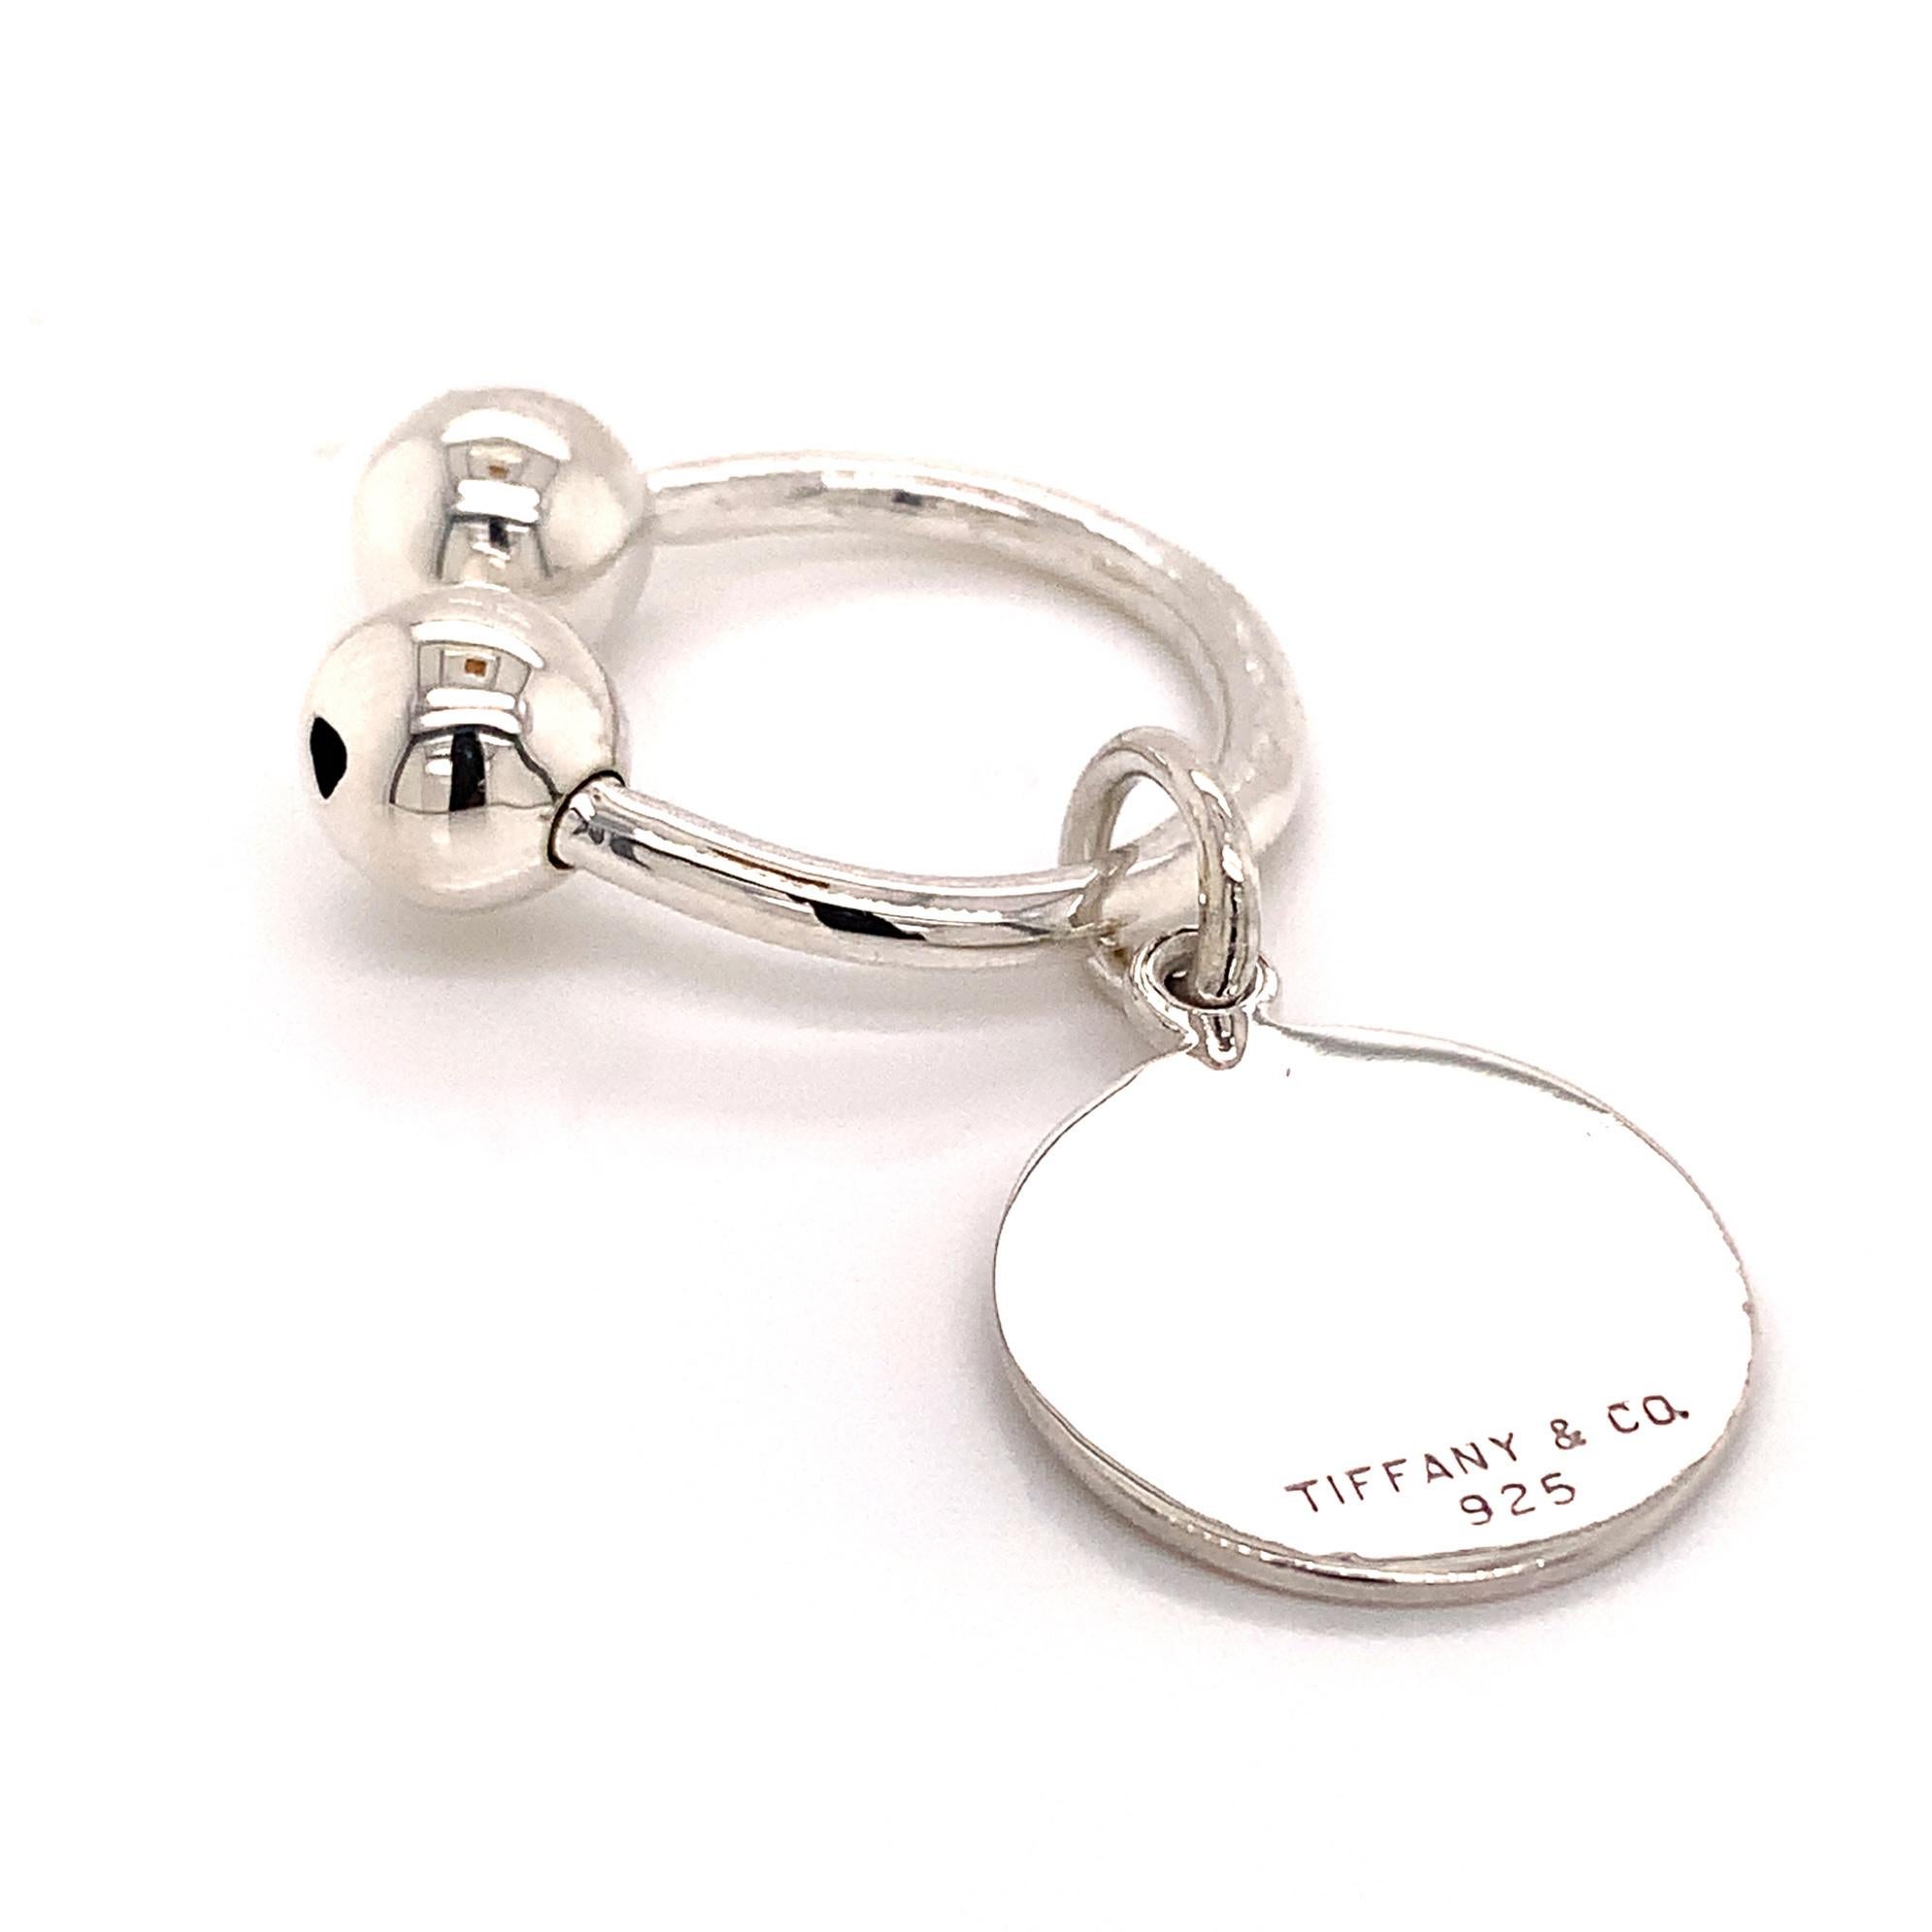 Tiffany & Co Estate Sterling Silver Keychain 9.2 Grams For Sale 2